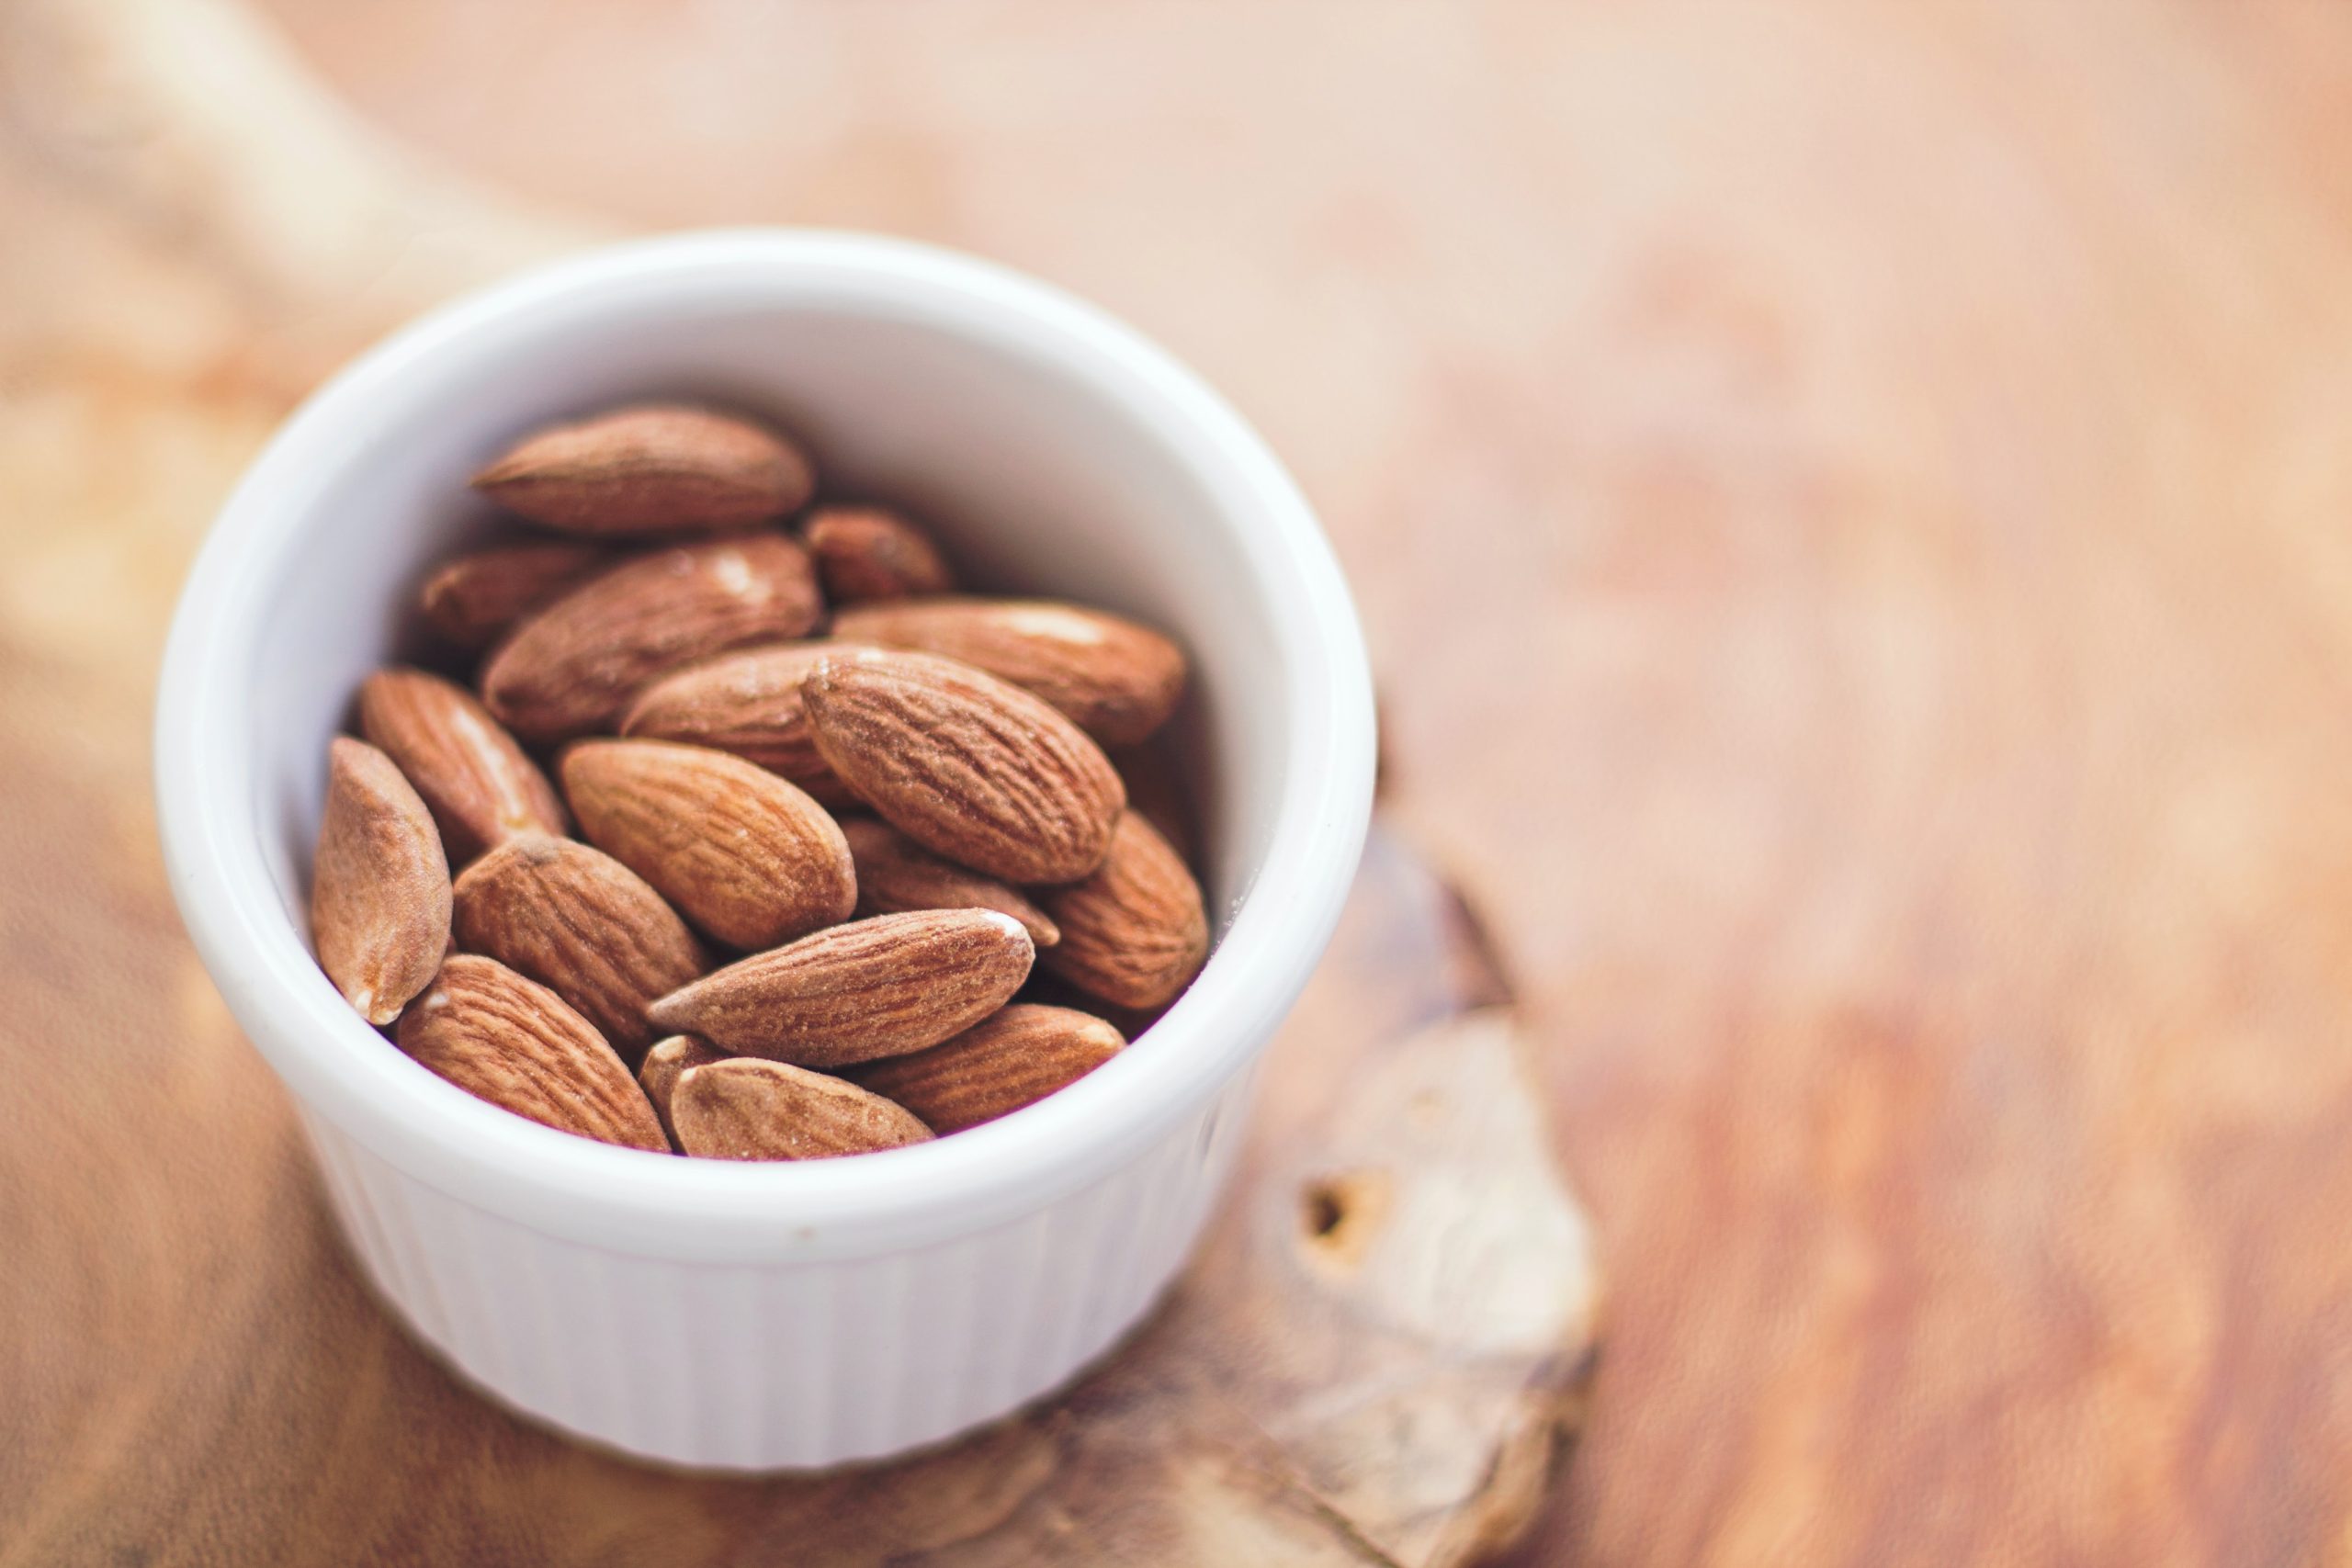 Can You Maintain Your Weight While Consuming Nuts And Nut Products?